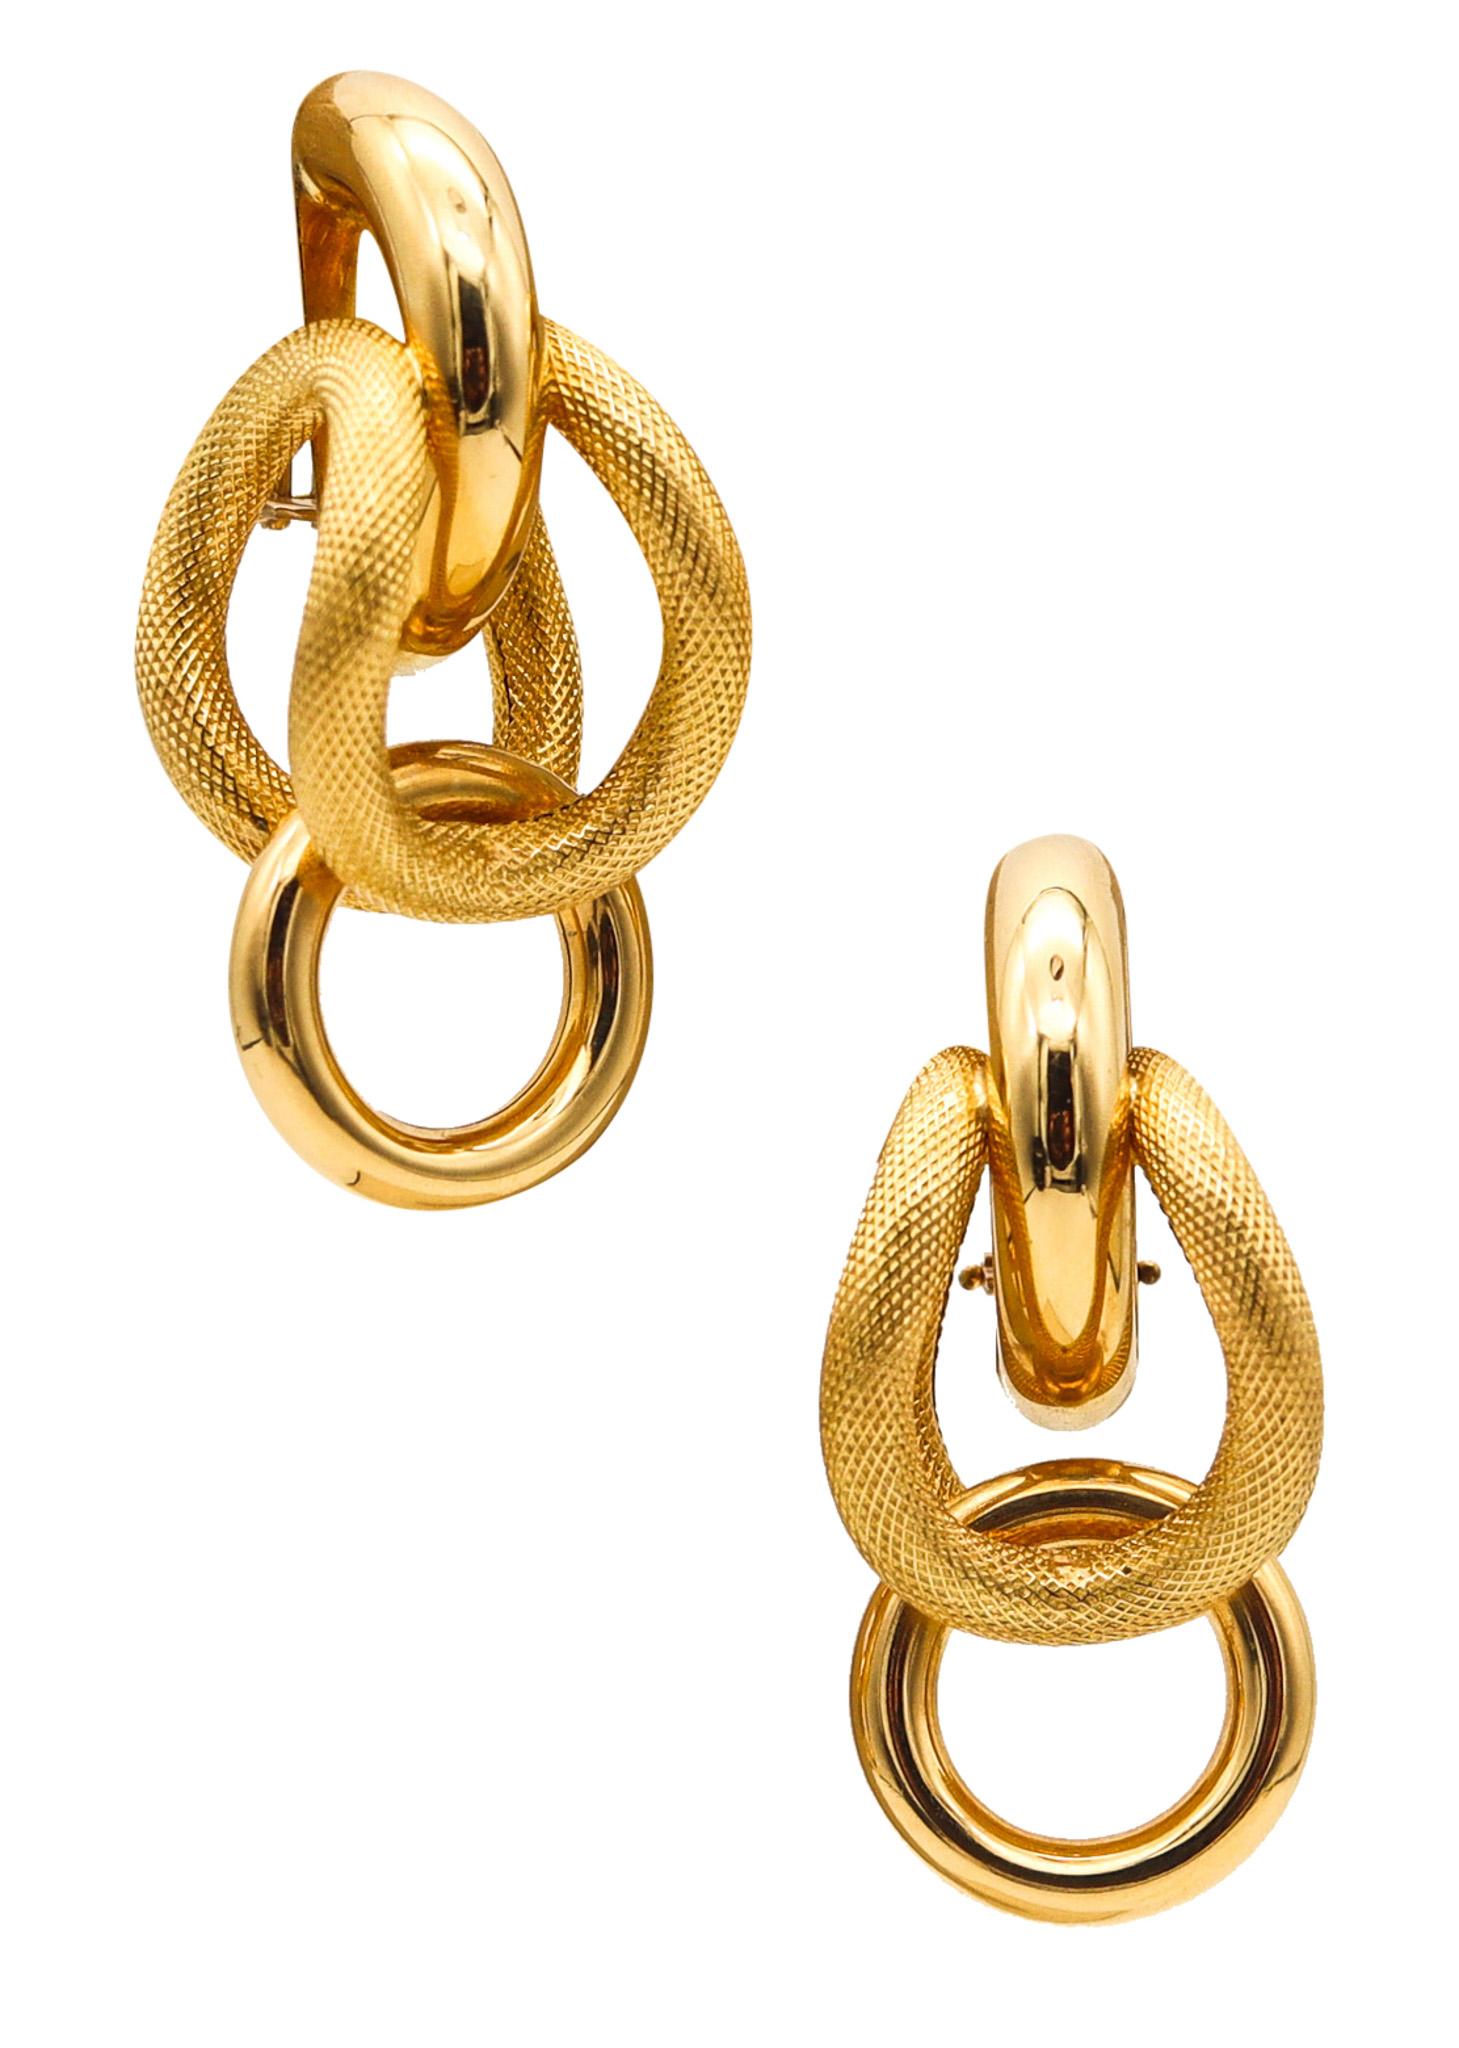 Riccardo Marotto Sculptural Tubular Earrings In Textured 18Kt Yellow Gold